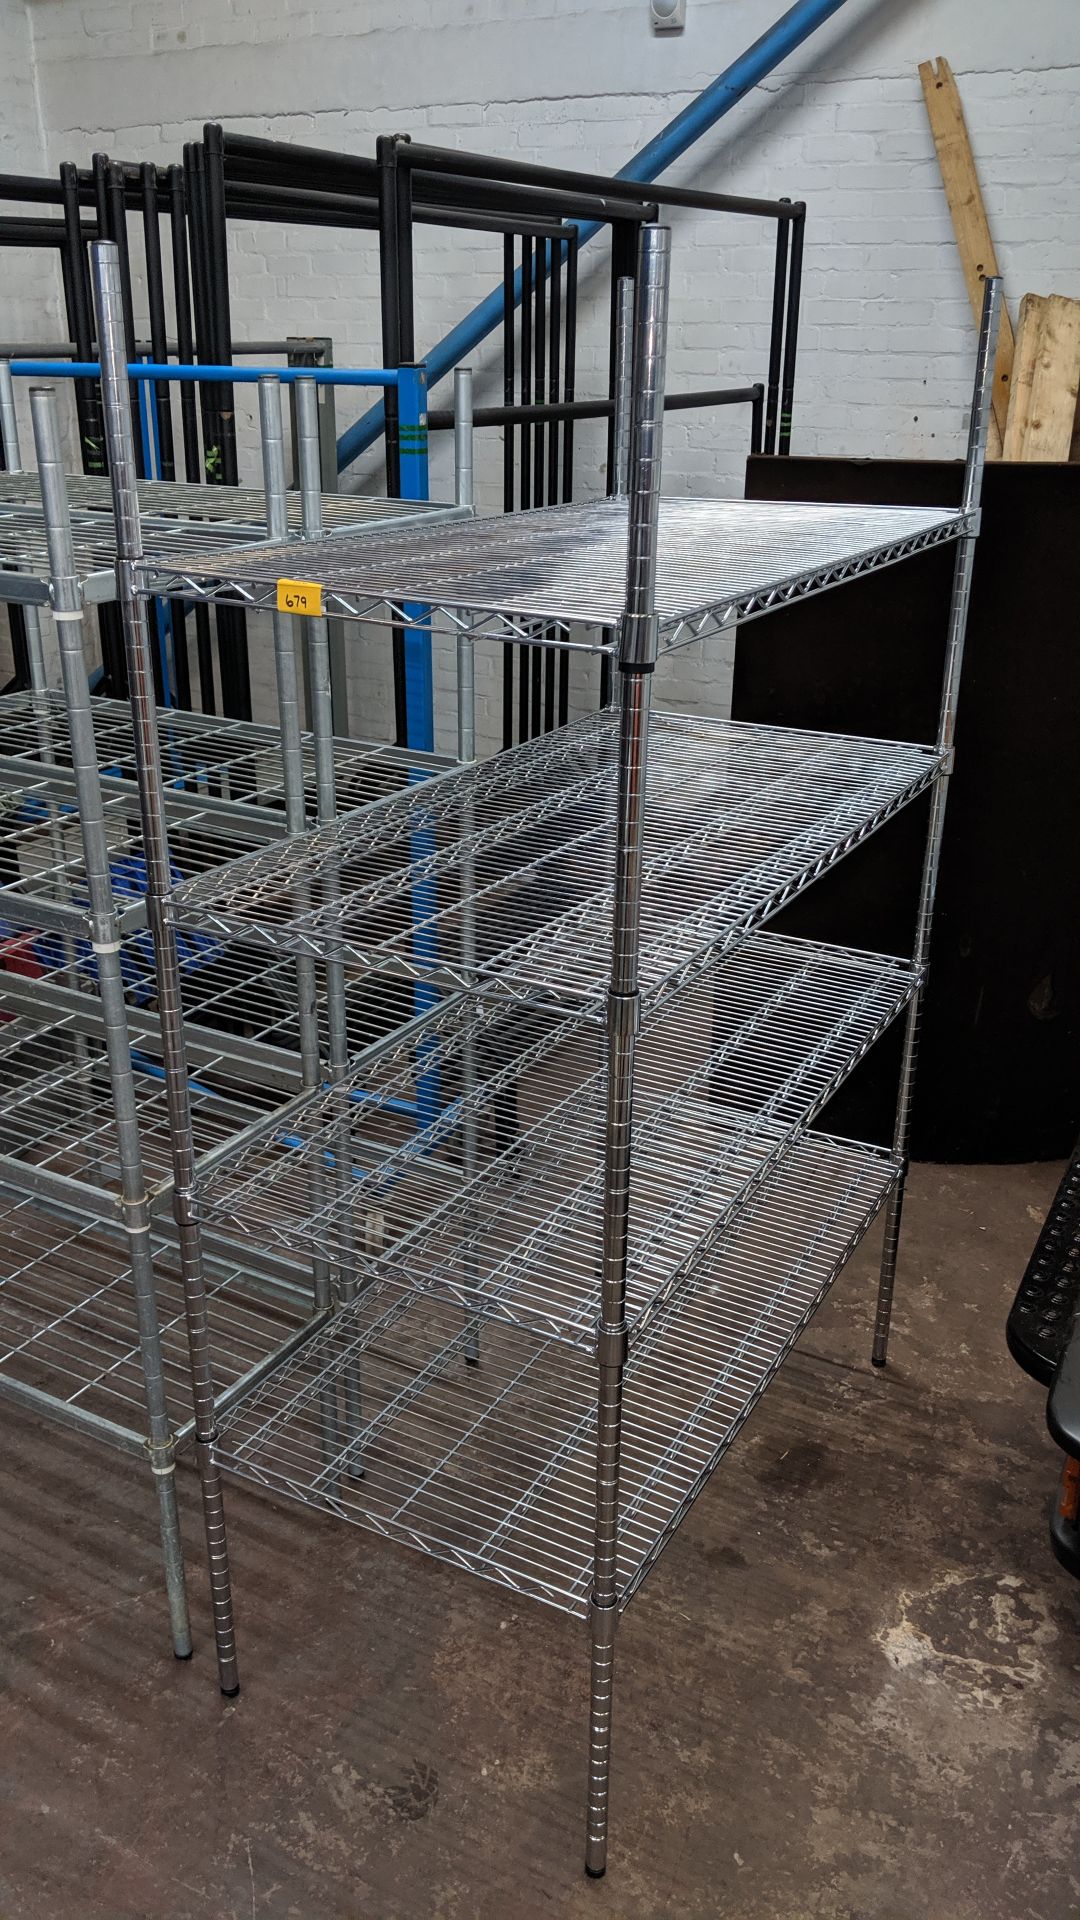 Large freestanding bay of chrome racking IMPORTANT: Please remember goods successfully bid upon must - Image 4 of 4